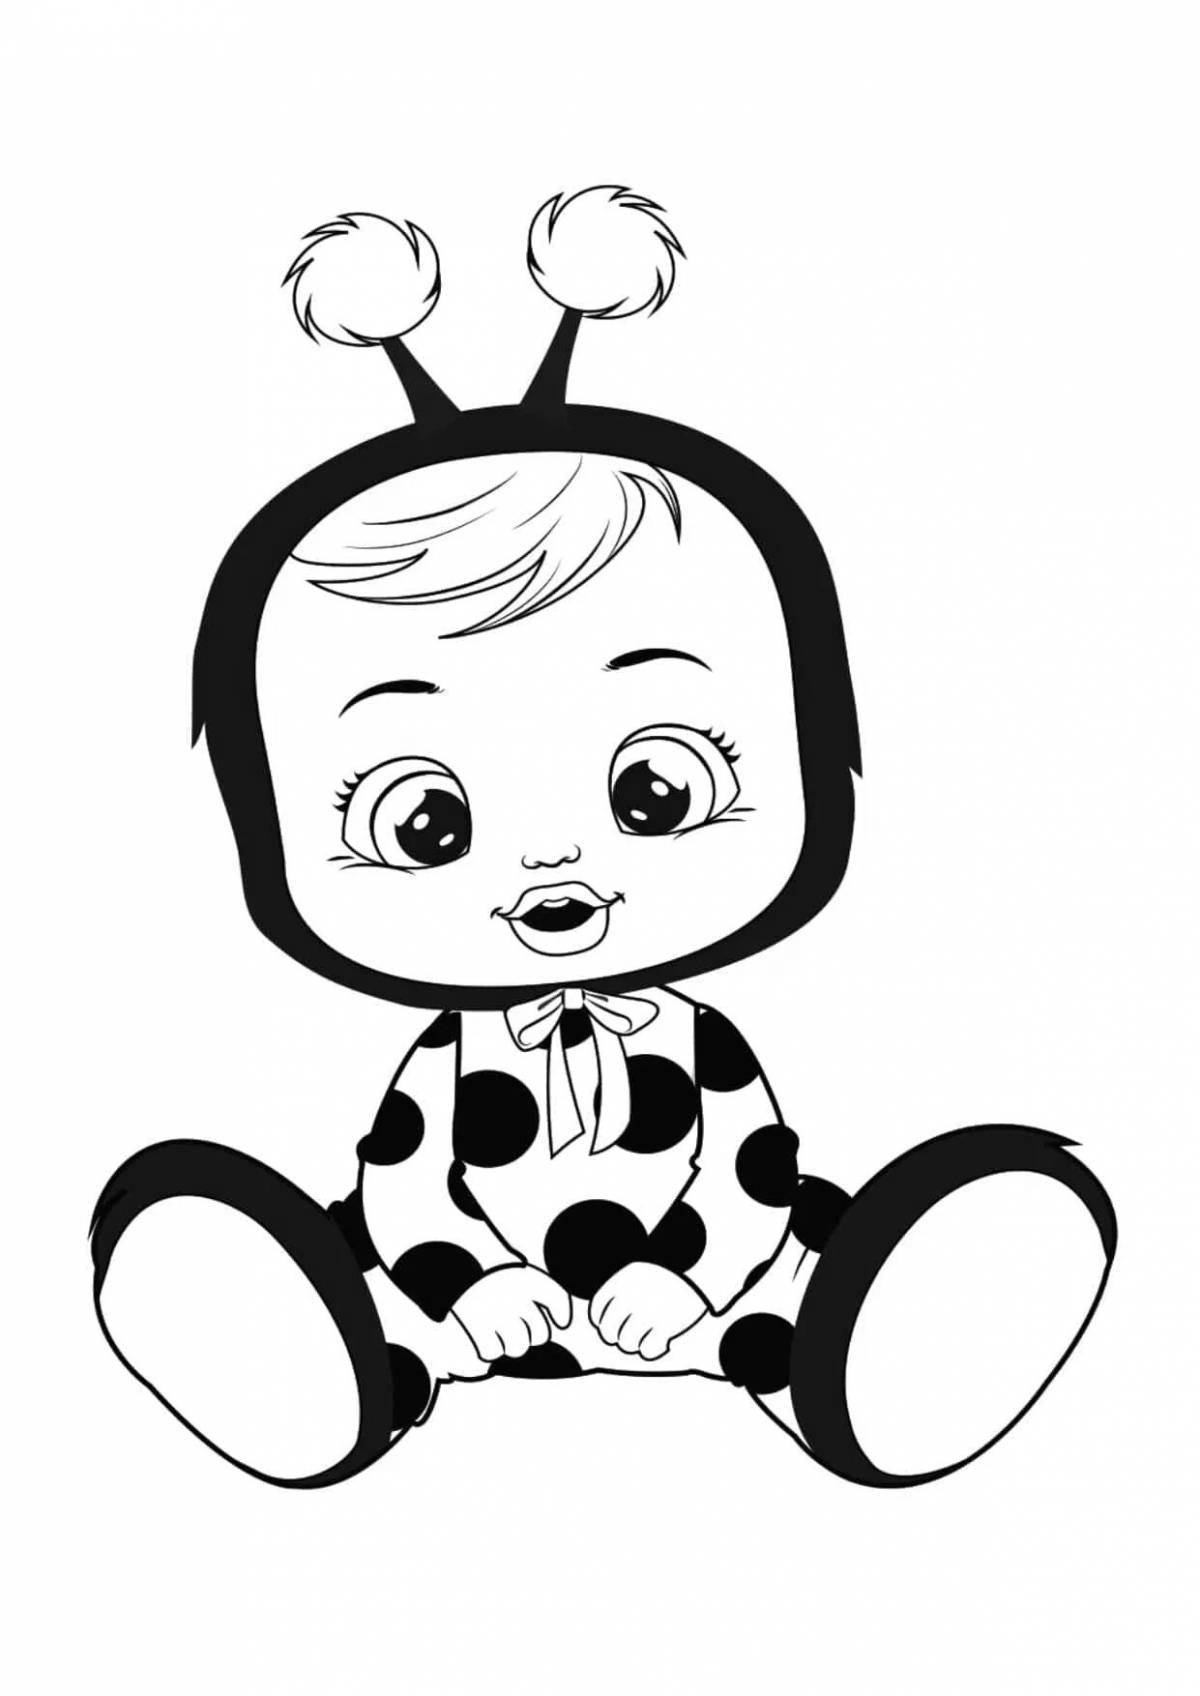 Adorable baby's edge coloring book for kids